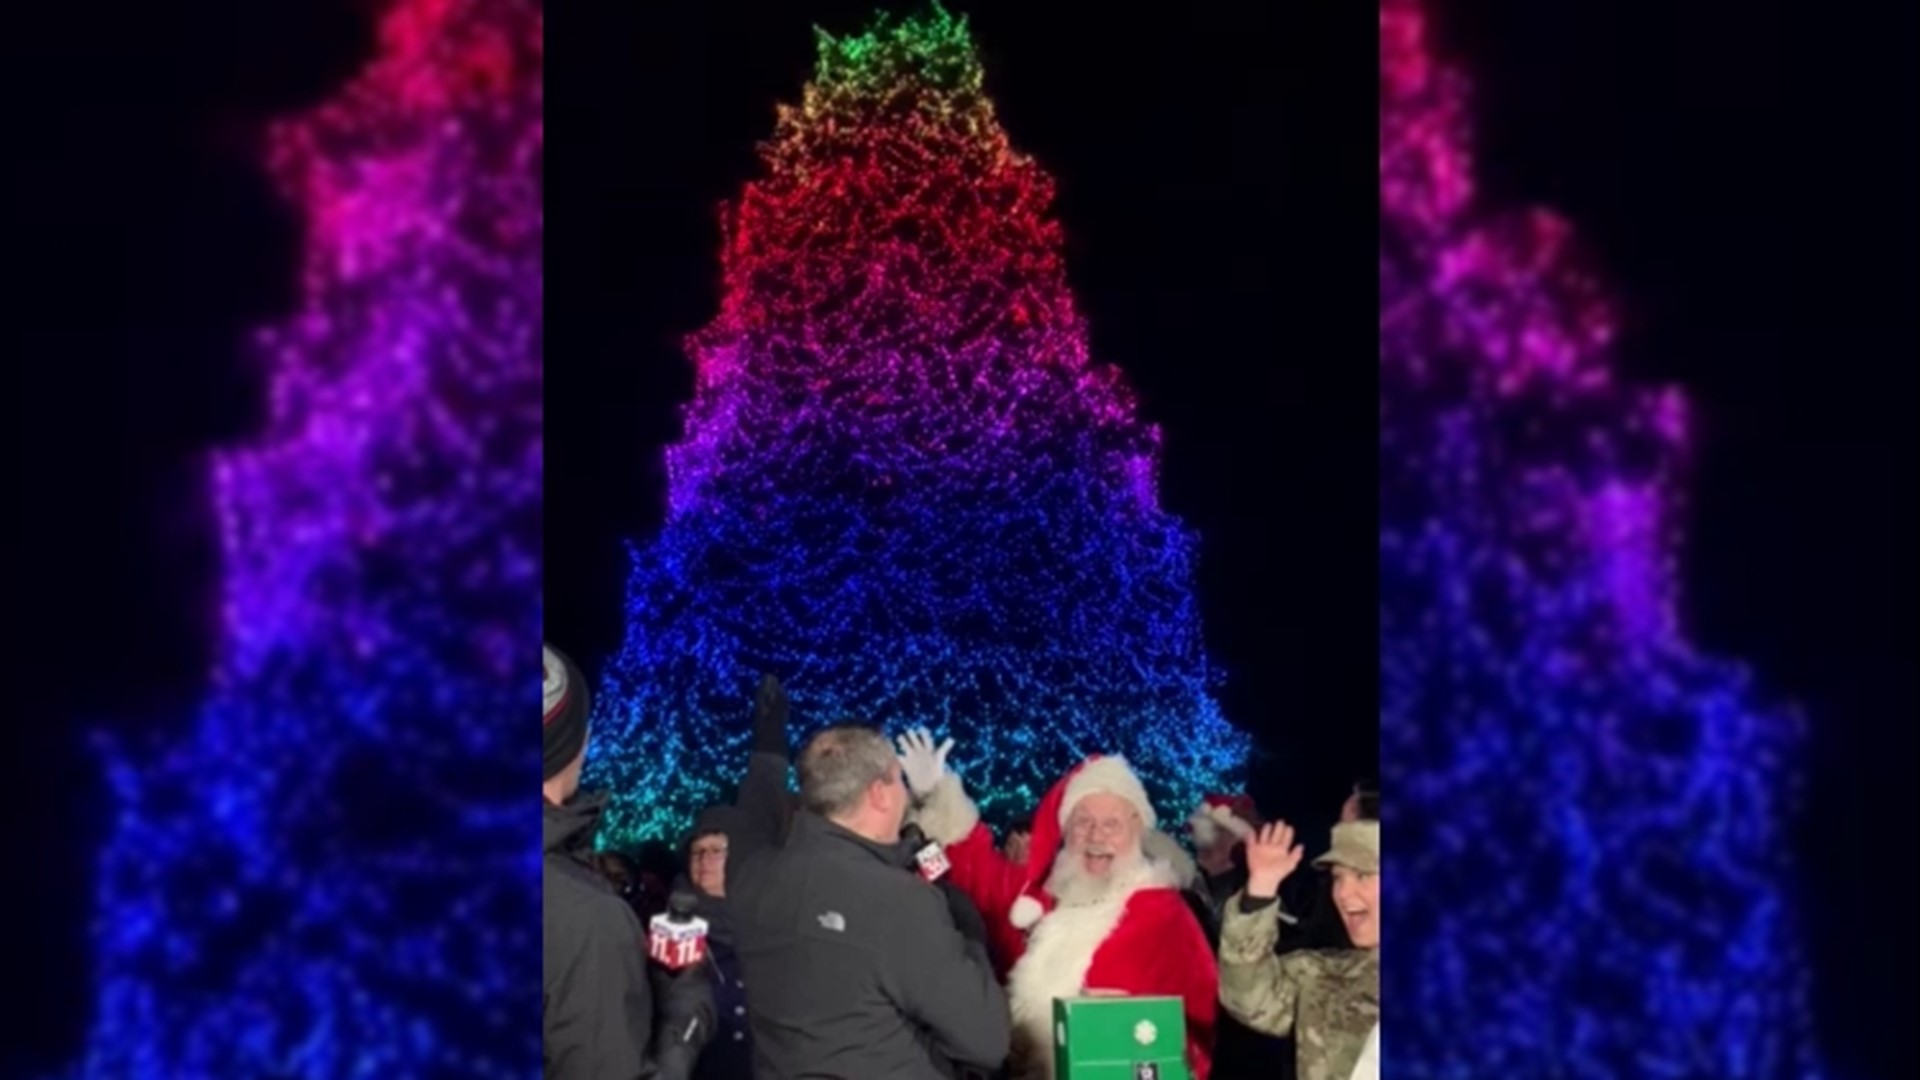 Master Sgt. Ariel McVicker and her son, 3-month-old George, flip the switch and light the Norway spruce at Toledo Zoo's Lights Before Christmas for 2021!